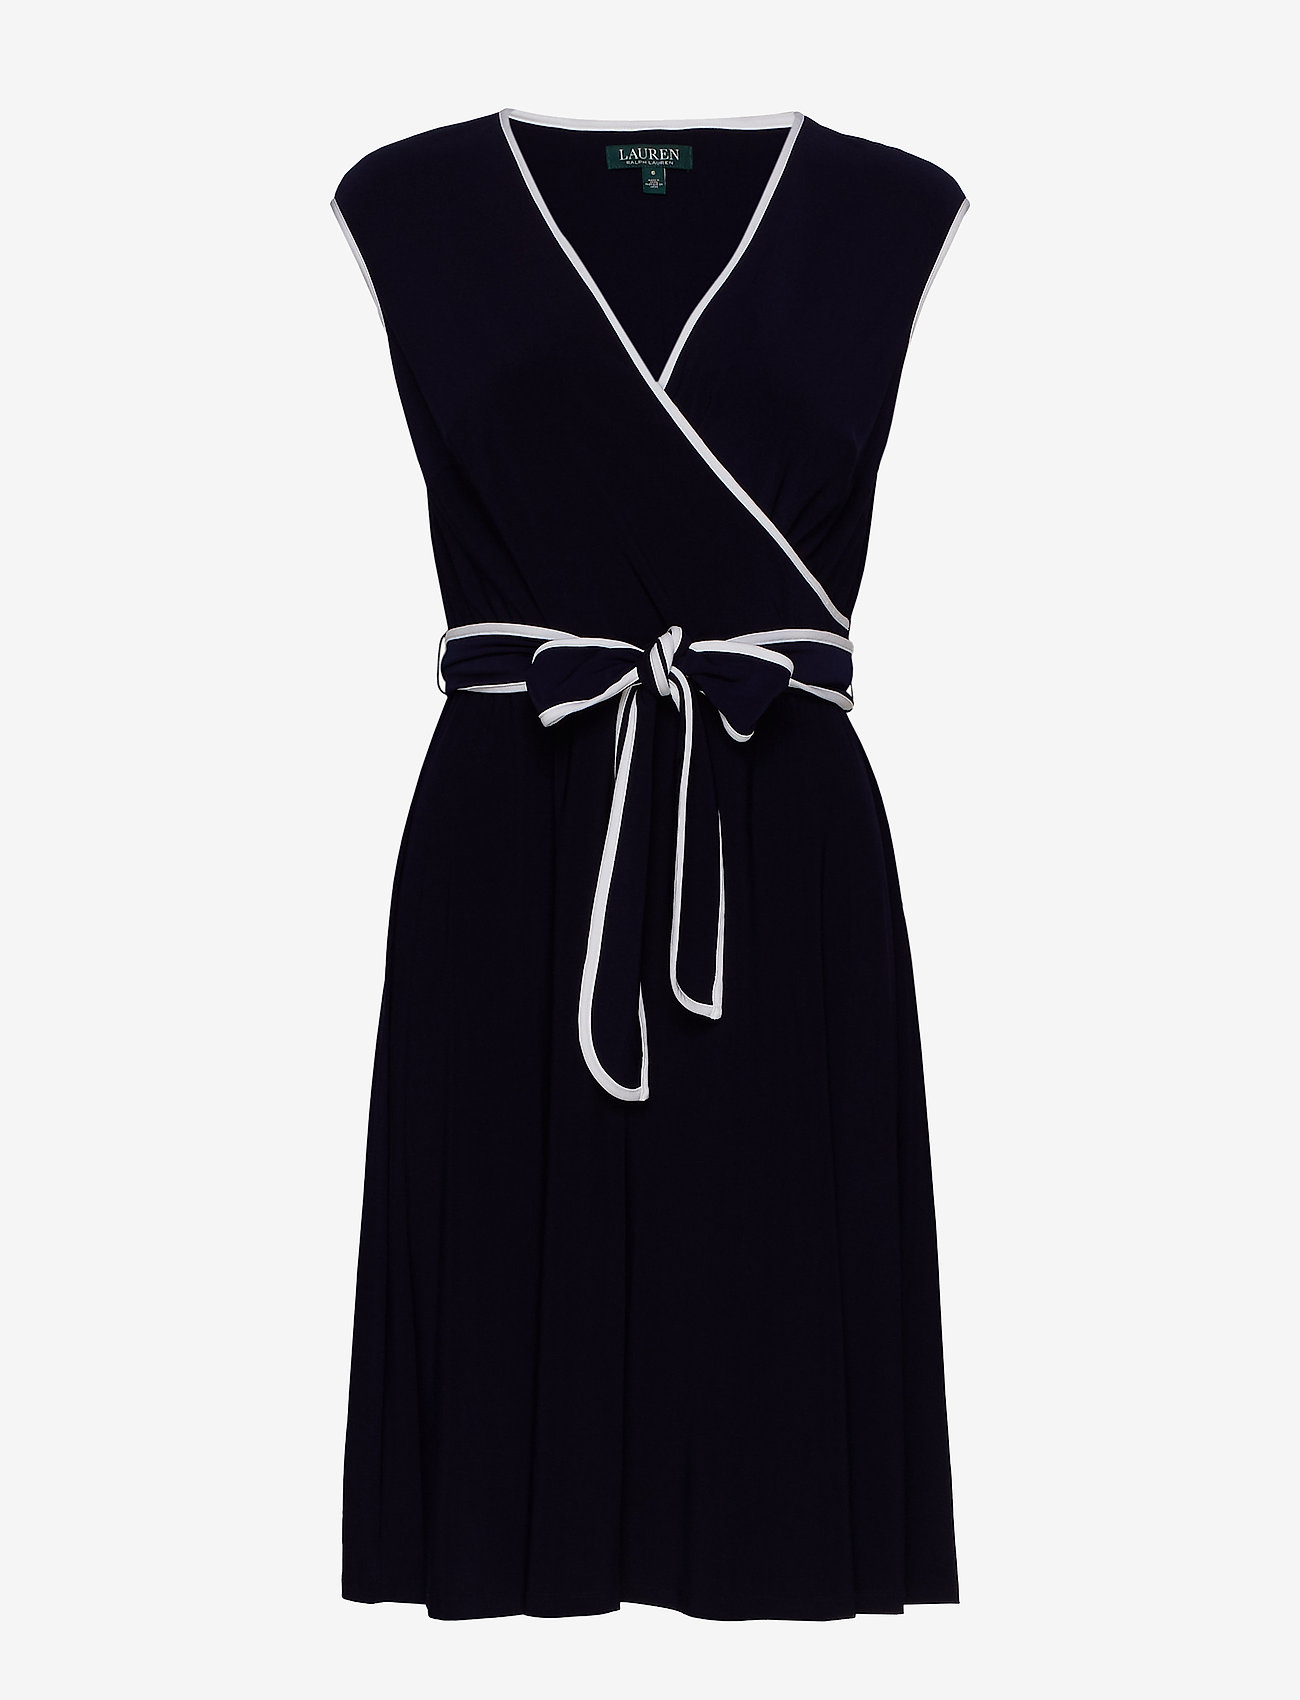 belted jersey dress